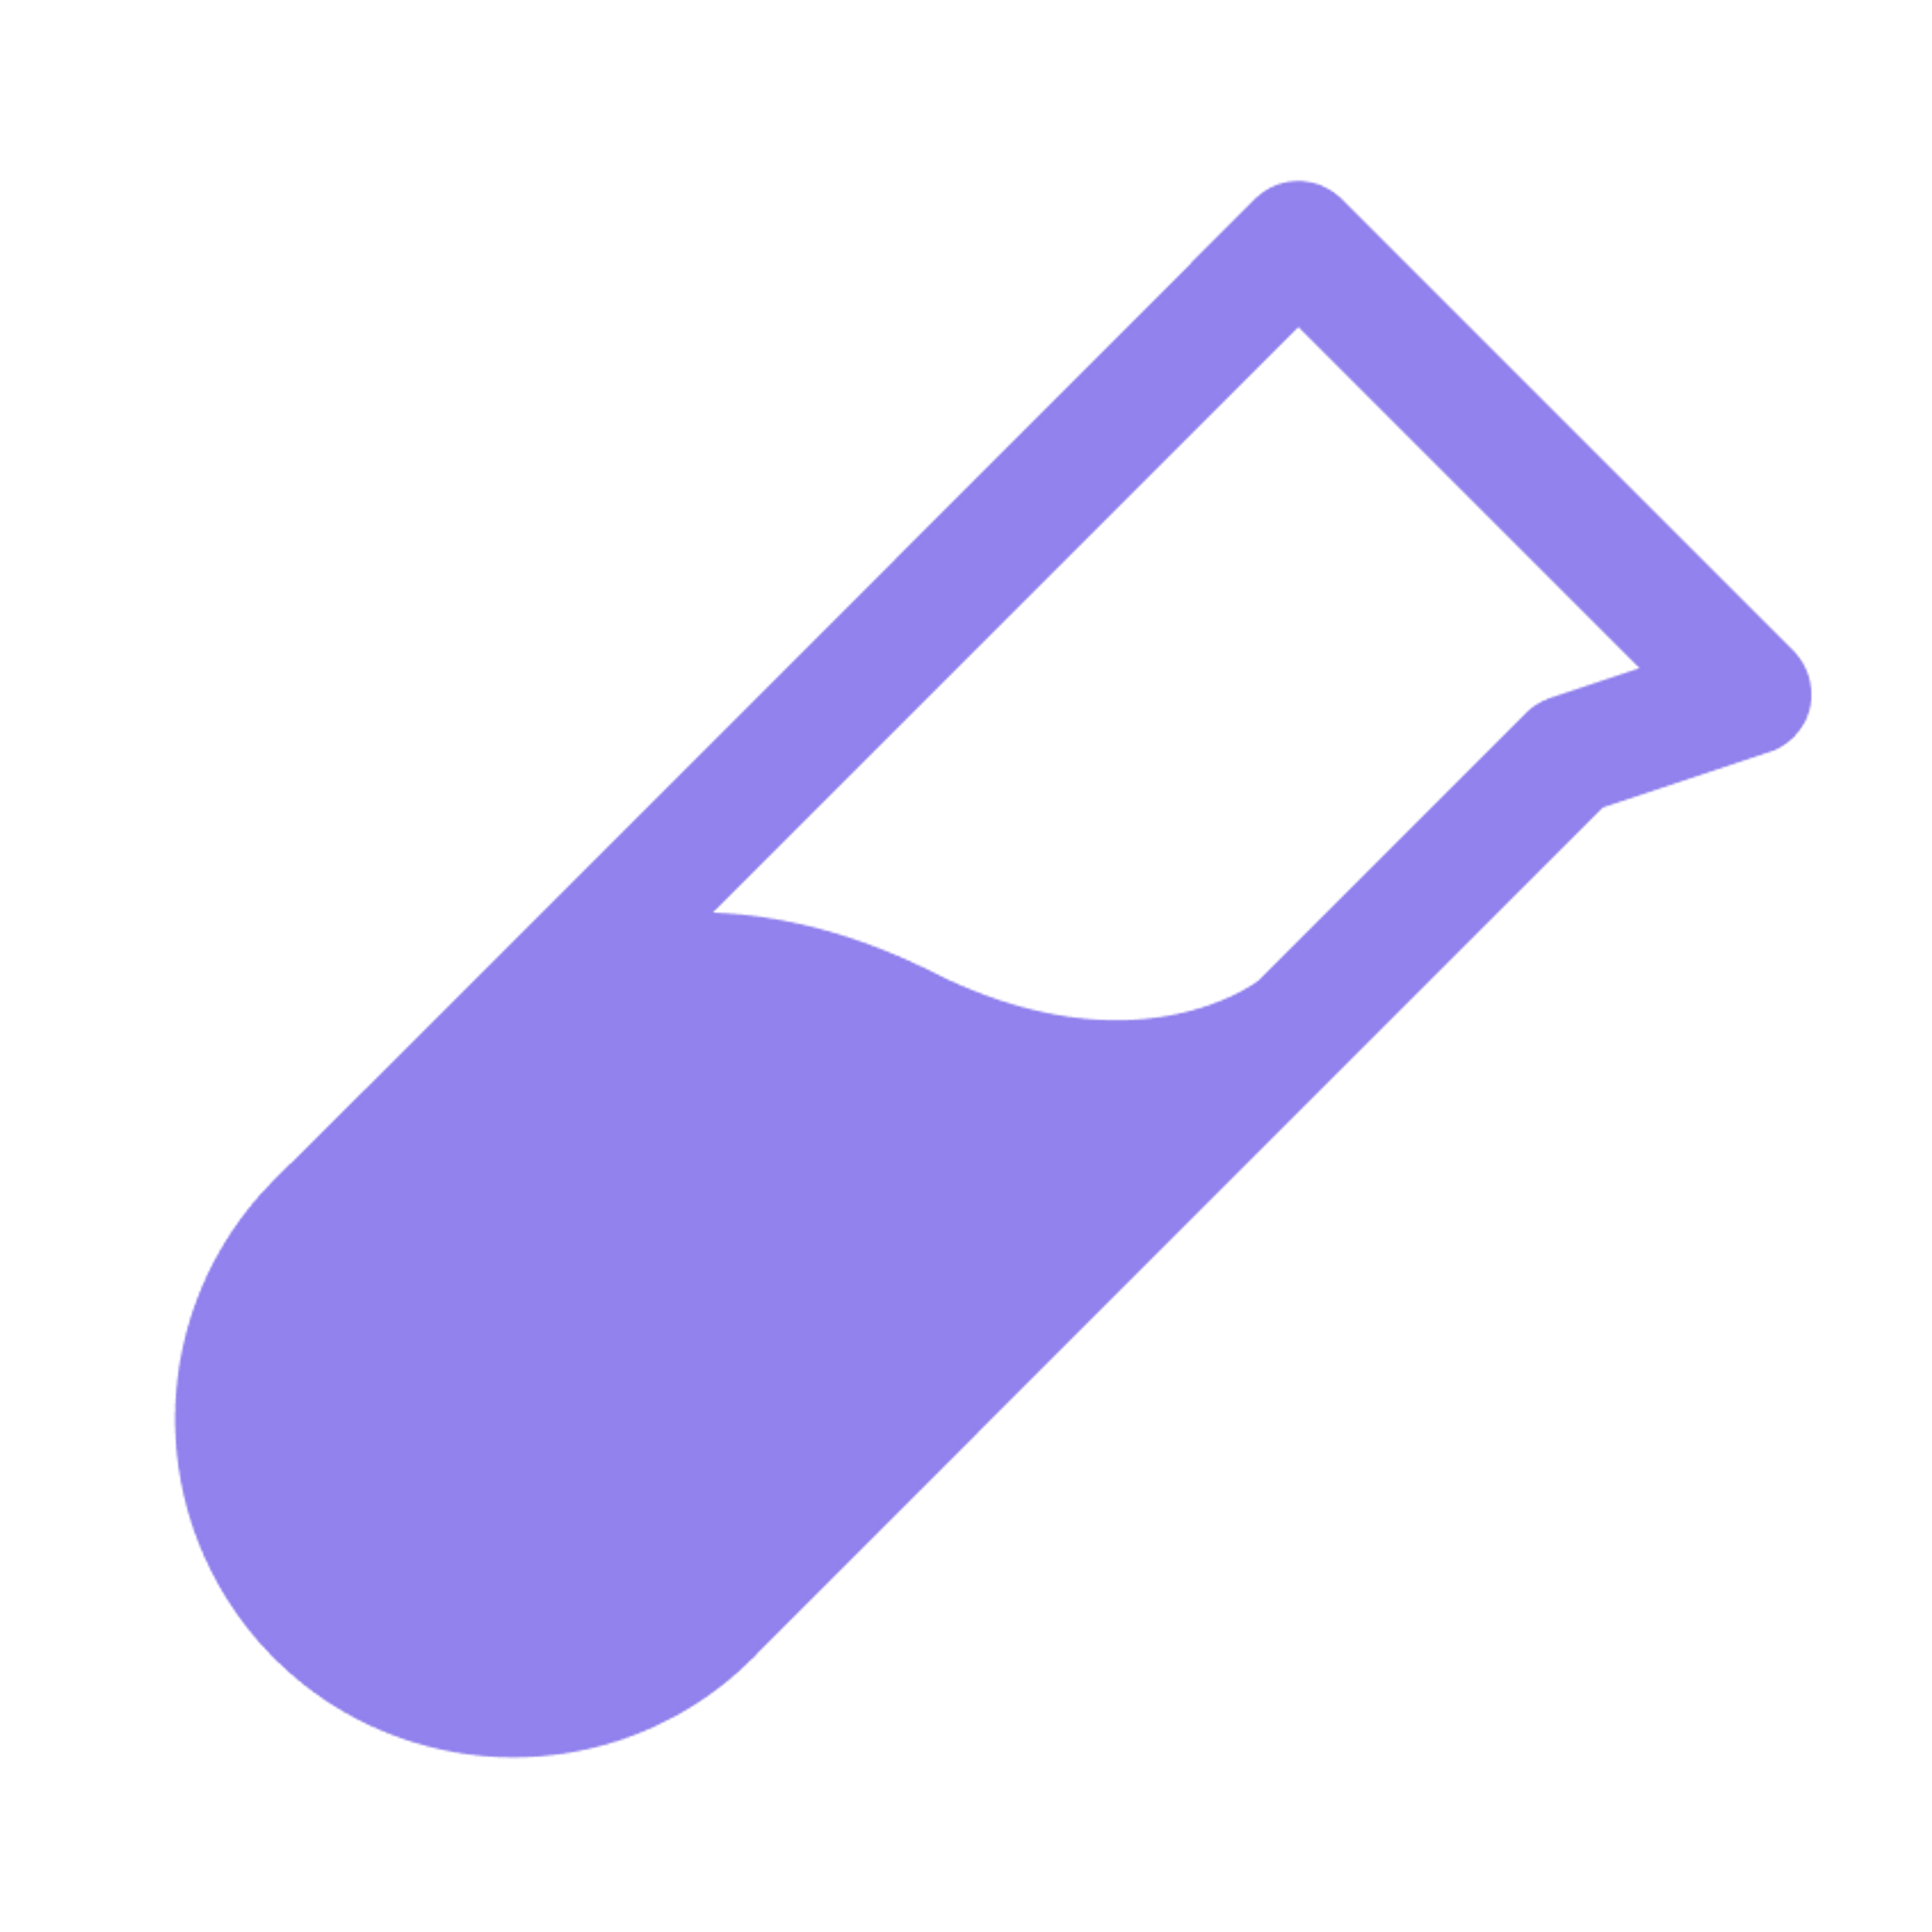 A purple icon of a test tube on a transparent background